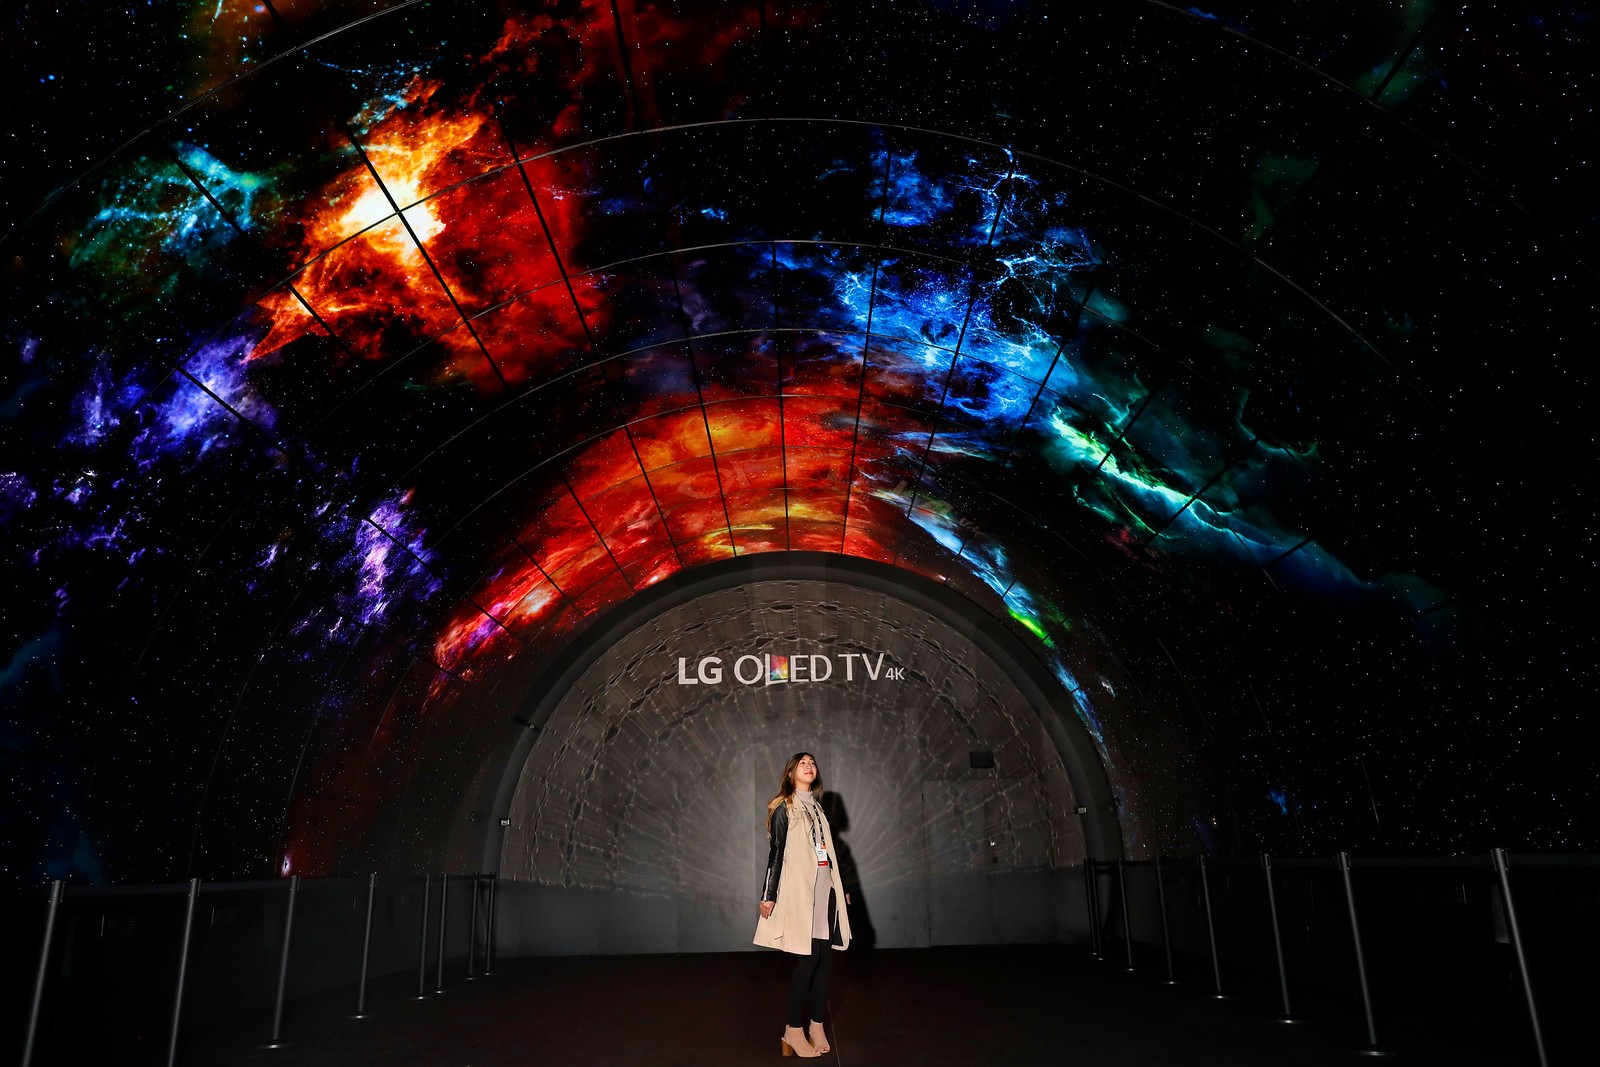 A woman stands under the LG OLED Tunnel which is set up at the entrance of LG's CES 2017 booth.